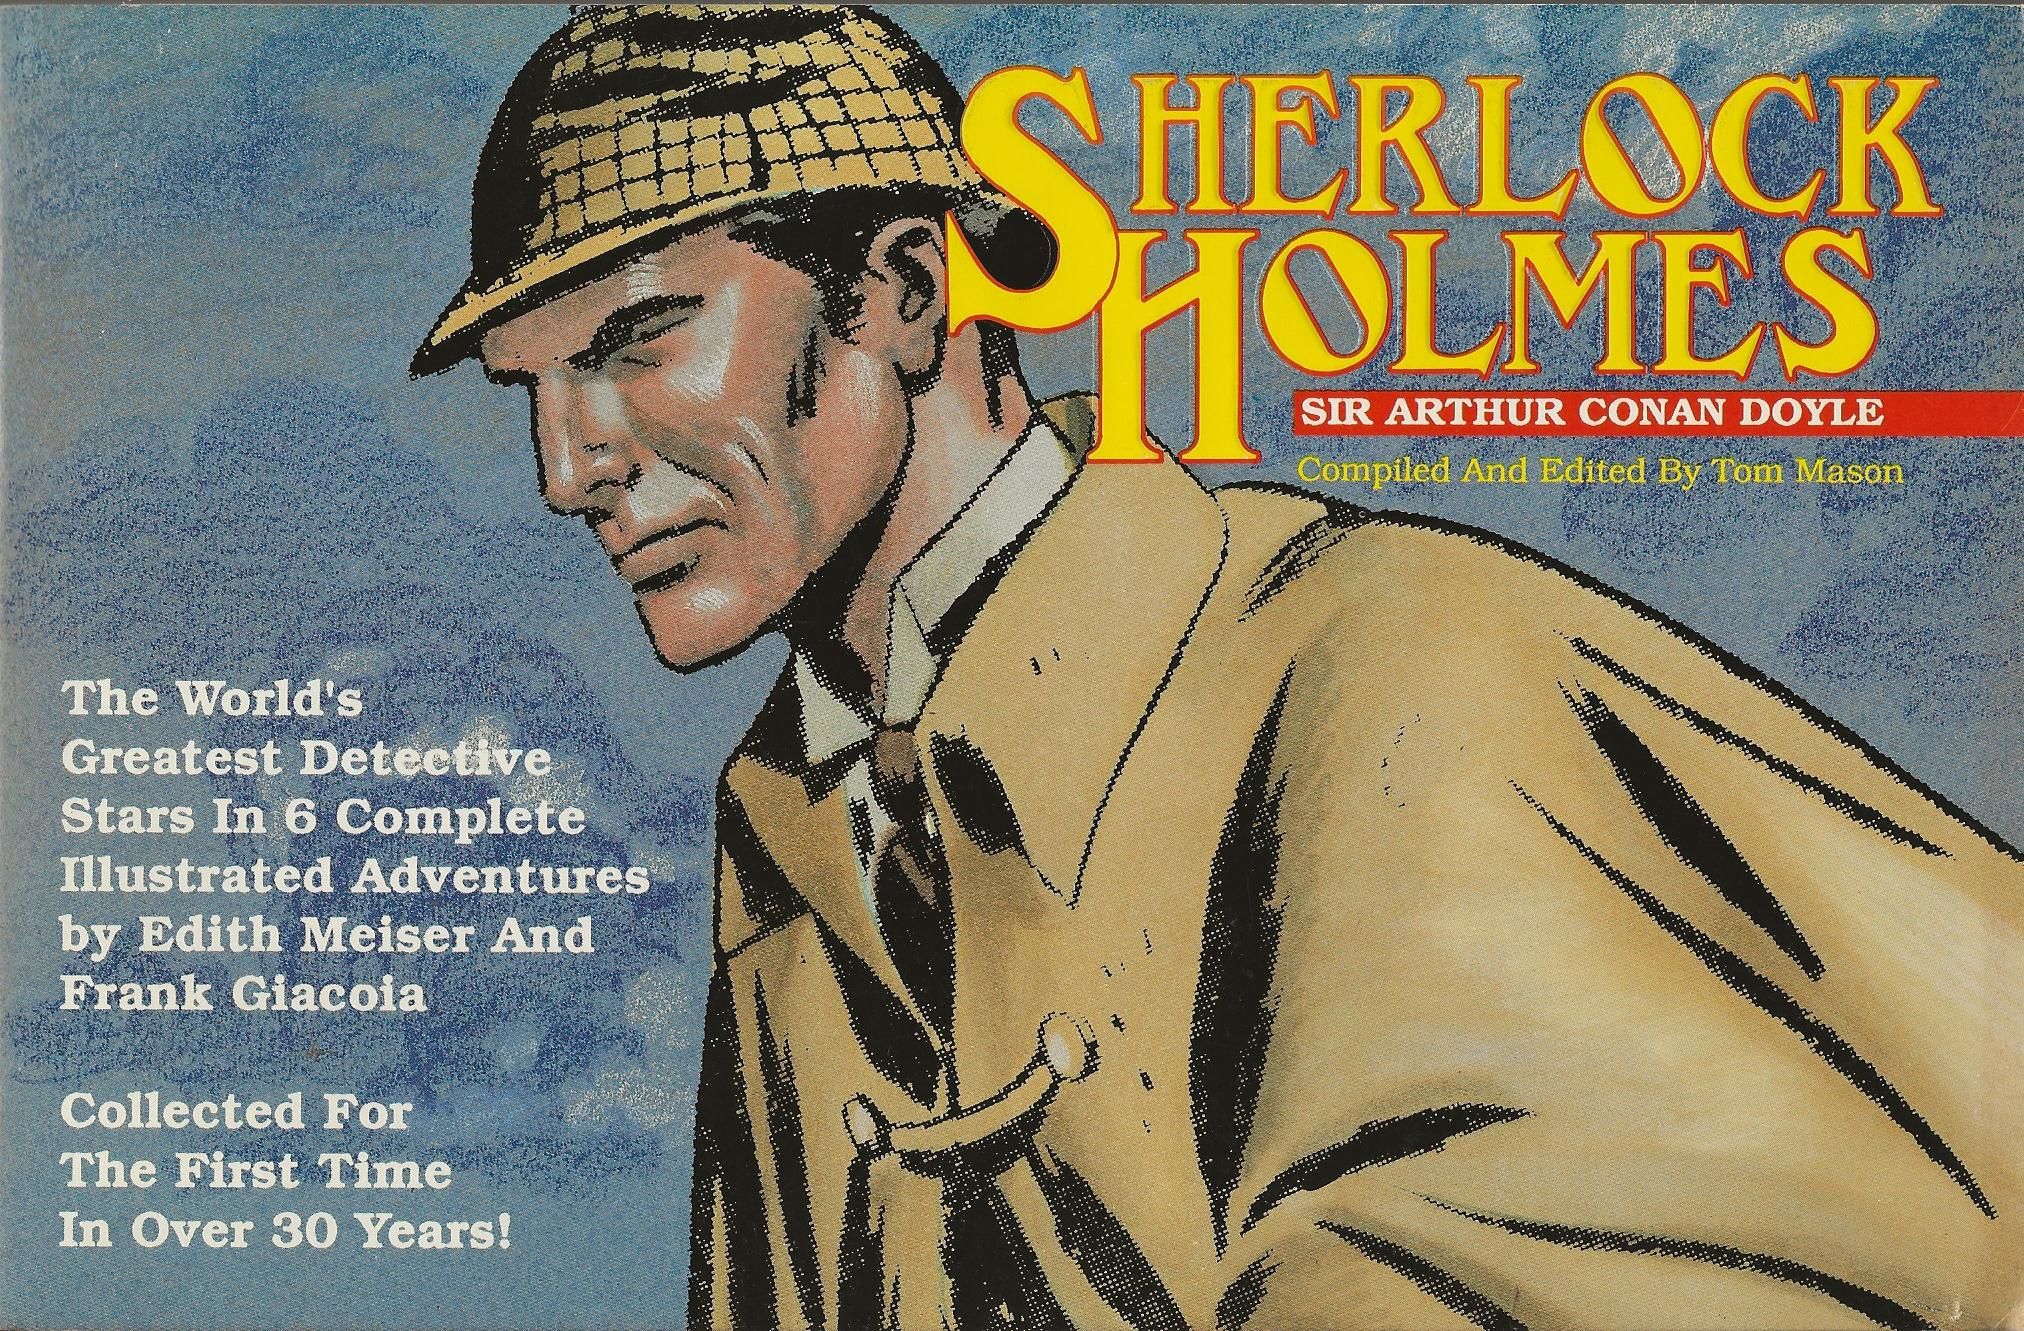 sherlock holmes and the art of deduction